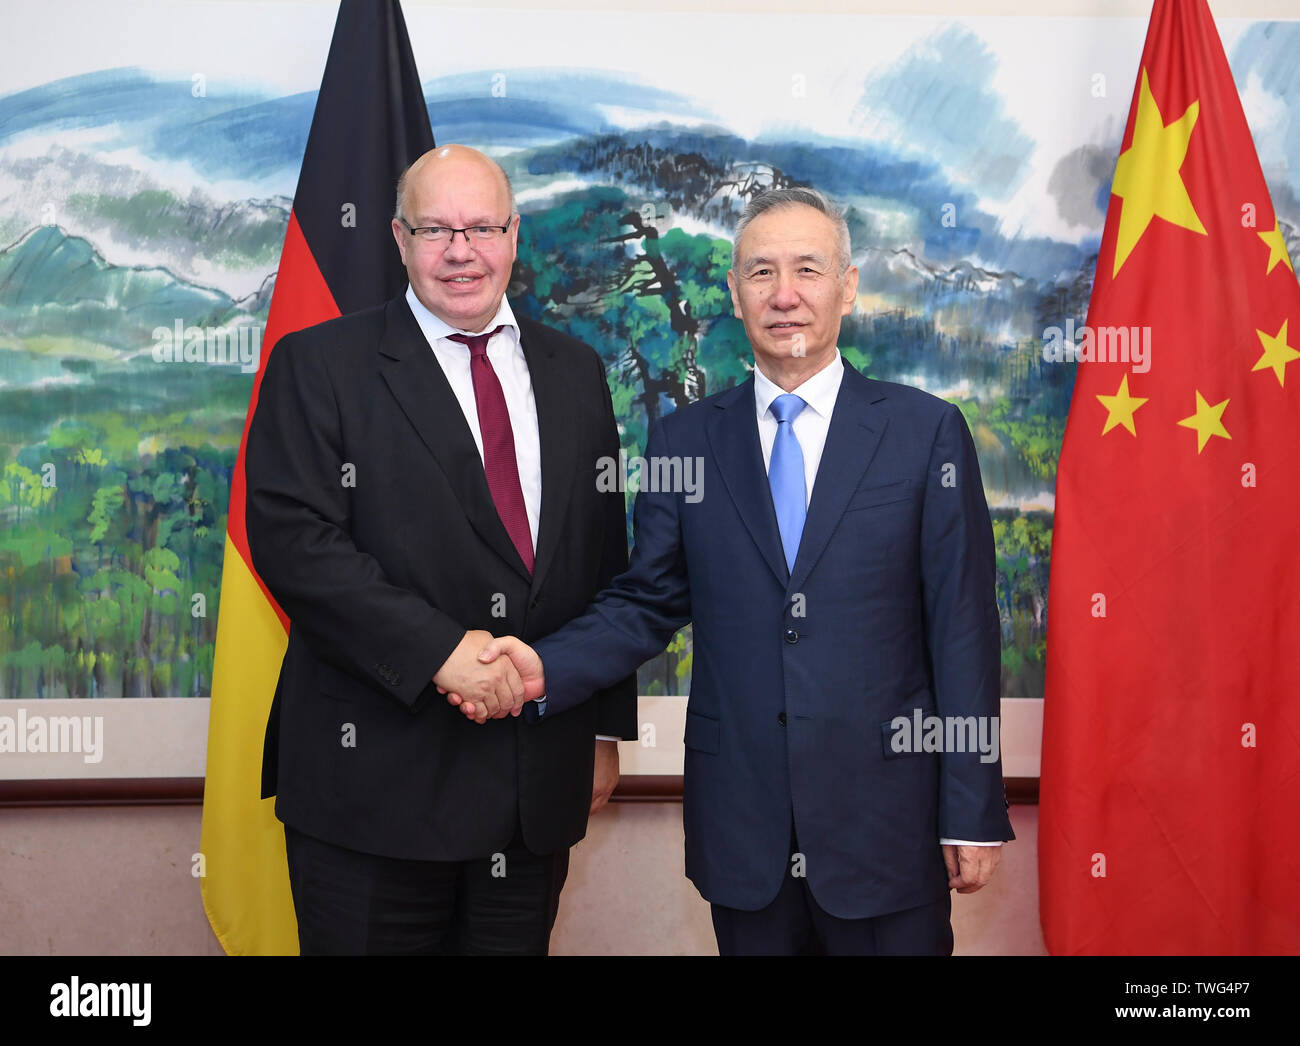 Beijing, China. 20th June, 2019. Chinese Vice Premier Liu He (R) meets with German Minister for Economic Affairs and Energy Peter Altmaier in Beijing, capital of China, June 20, 2019. Credit: Zhang Ling/Xinhua/Alamy Live News Stock Photo